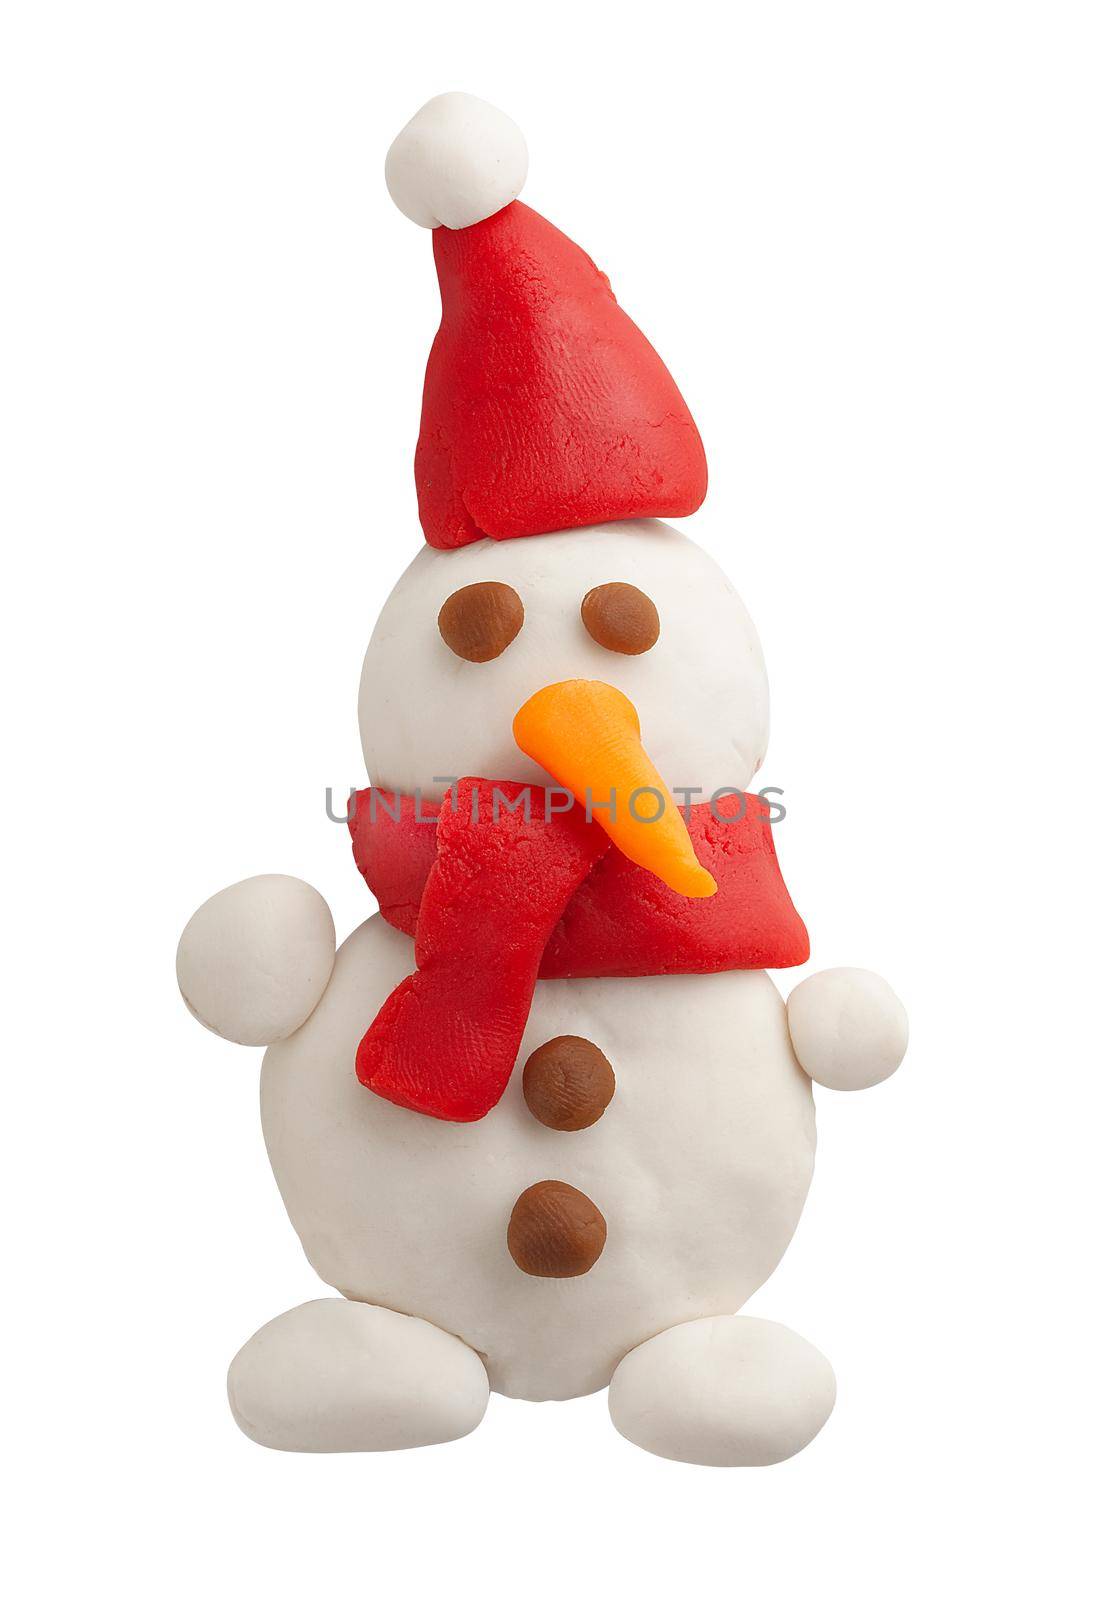 Plasticine snowman in red scarf and hat by Angorius